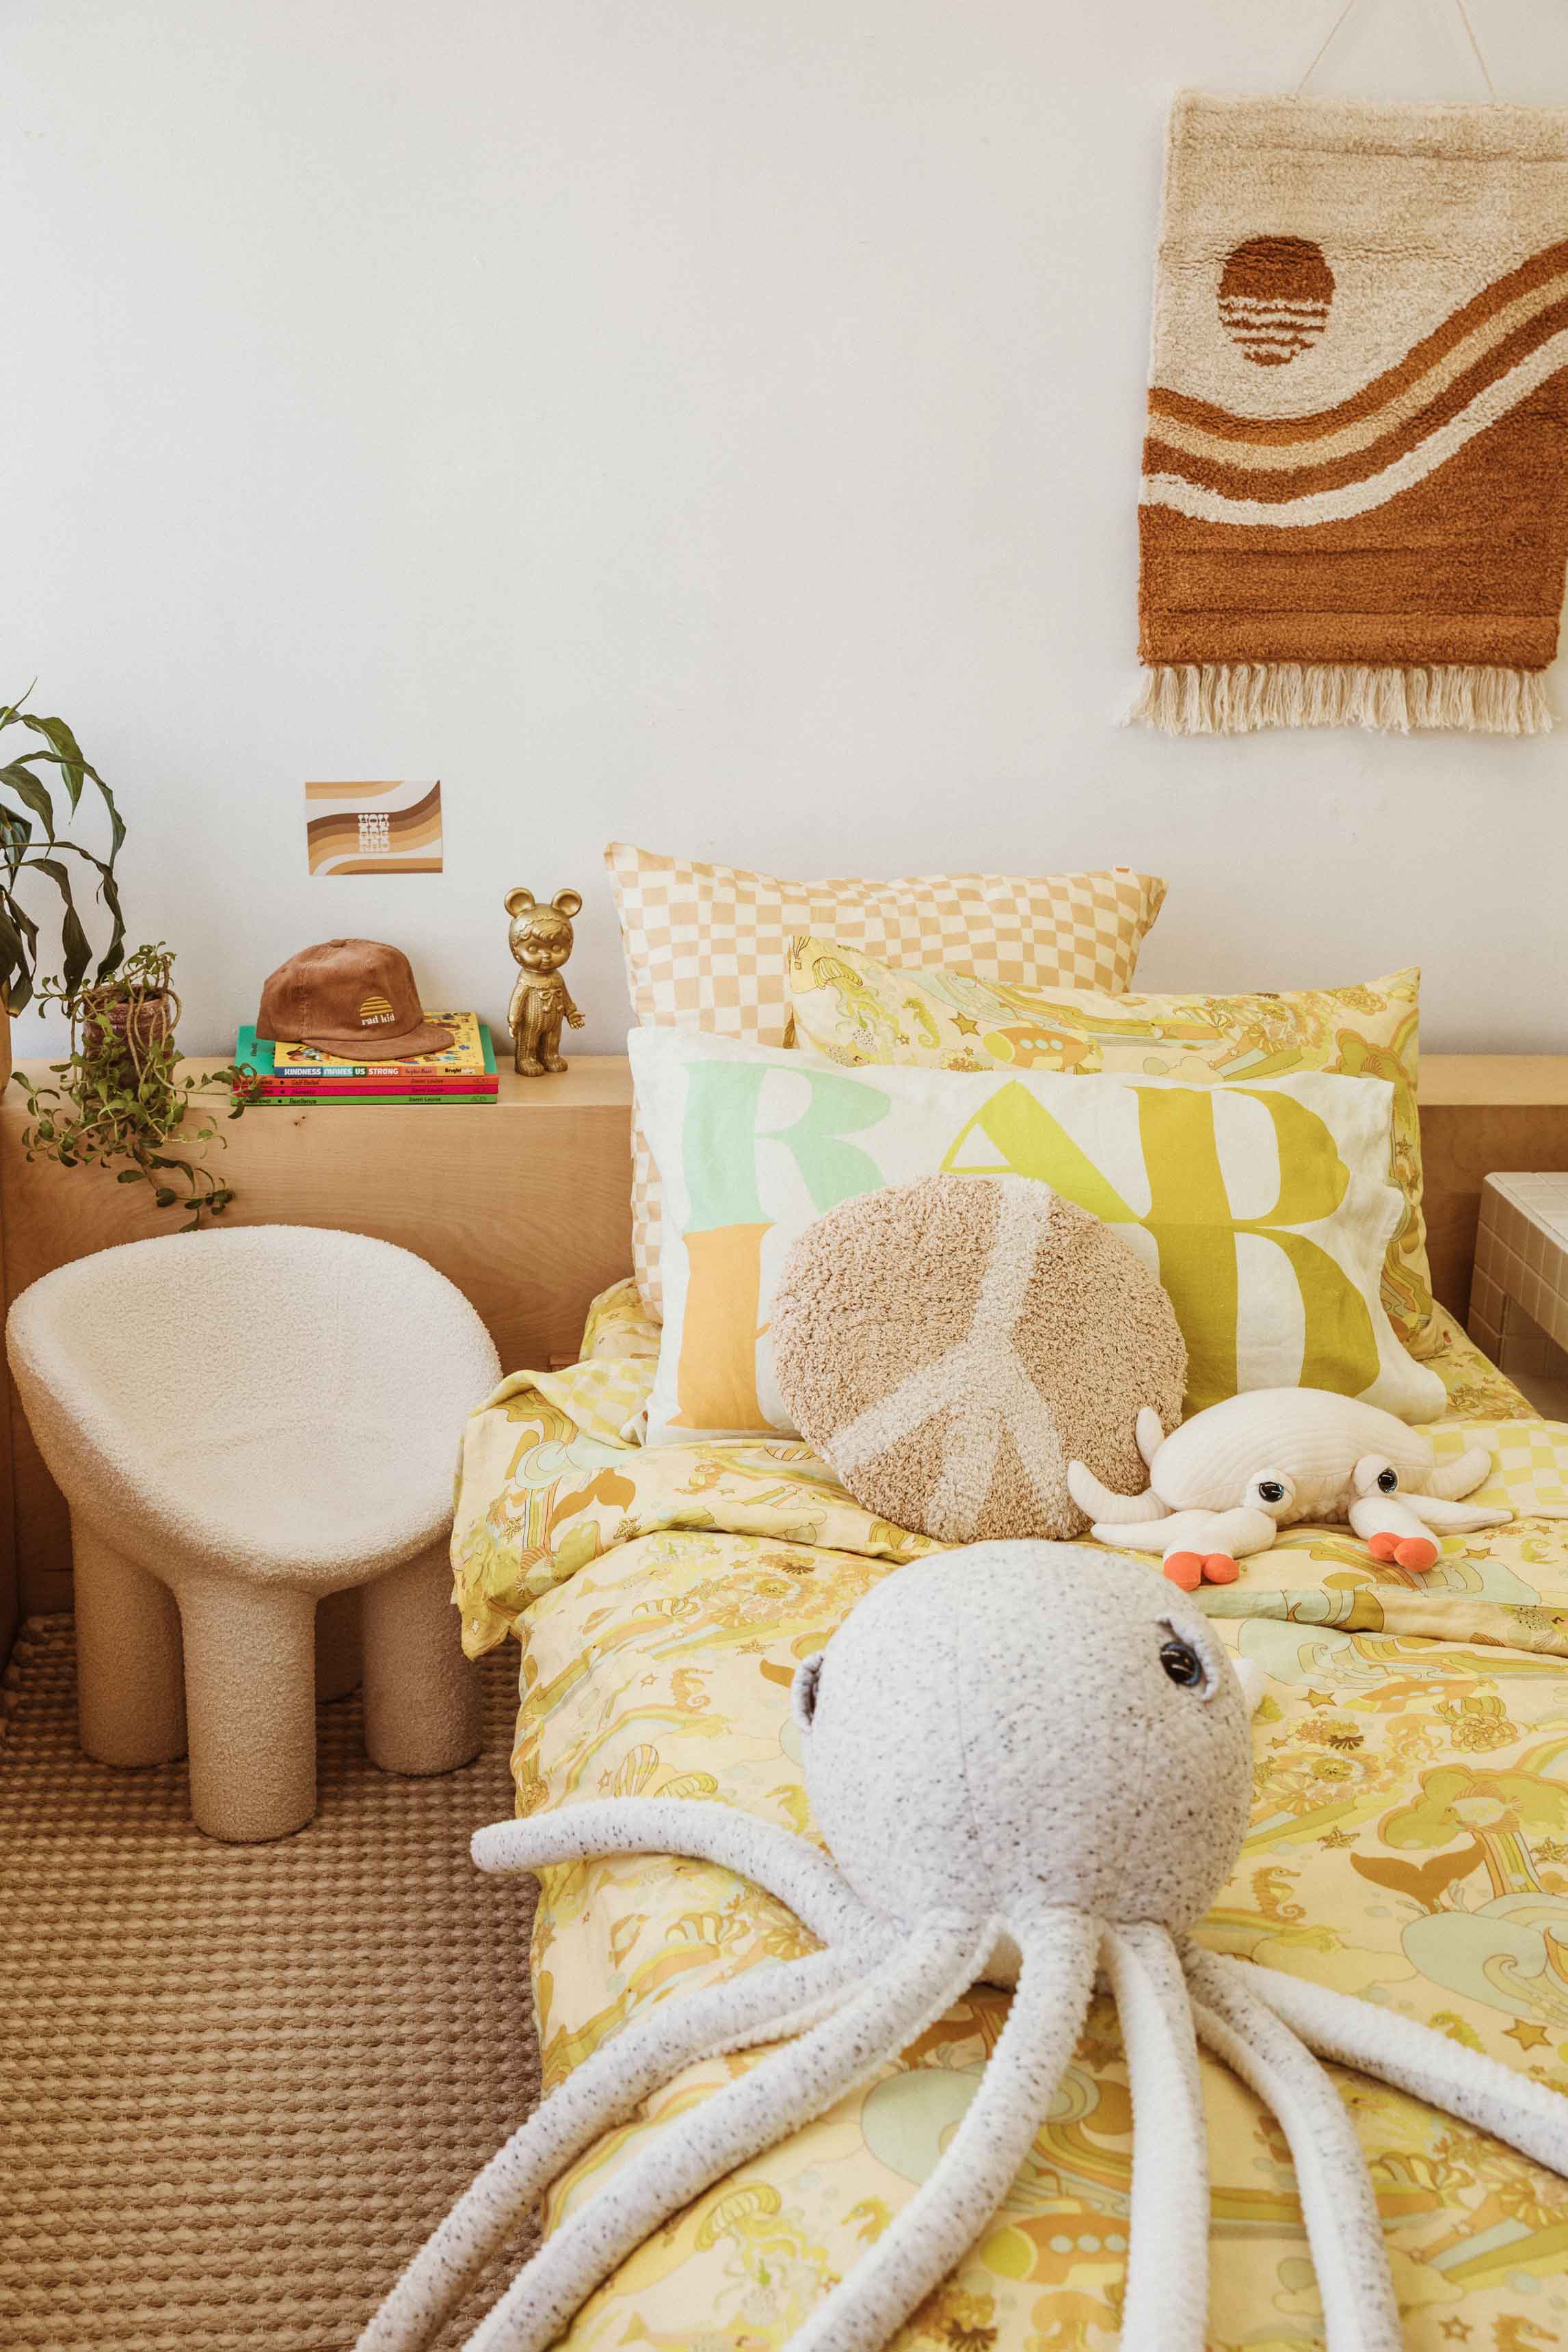 The Brightside: Setting up a Montessori style bedroom space